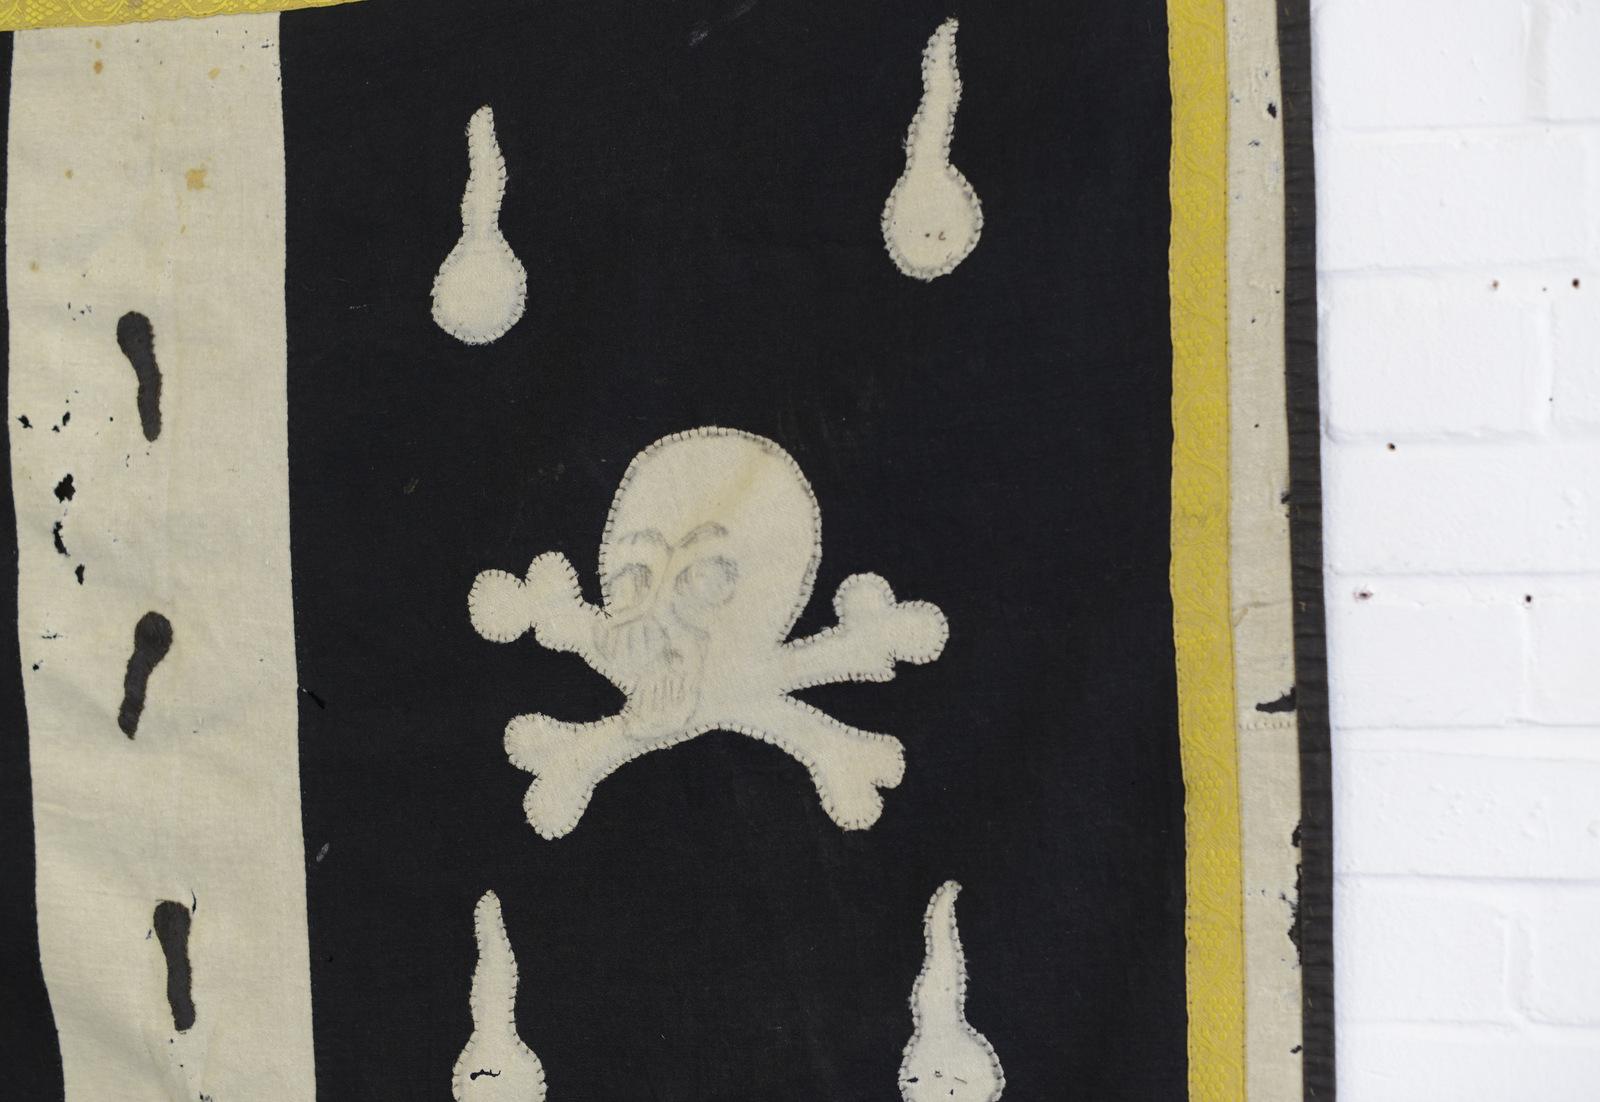 19th century Memento Mori Coffin cover

- Hand stitched felt tears and skulls
- Made from linen
- Original pencil lines mark where it would have been embroidered at a later time
- Would have been made to drape over a coffin as it was lowered